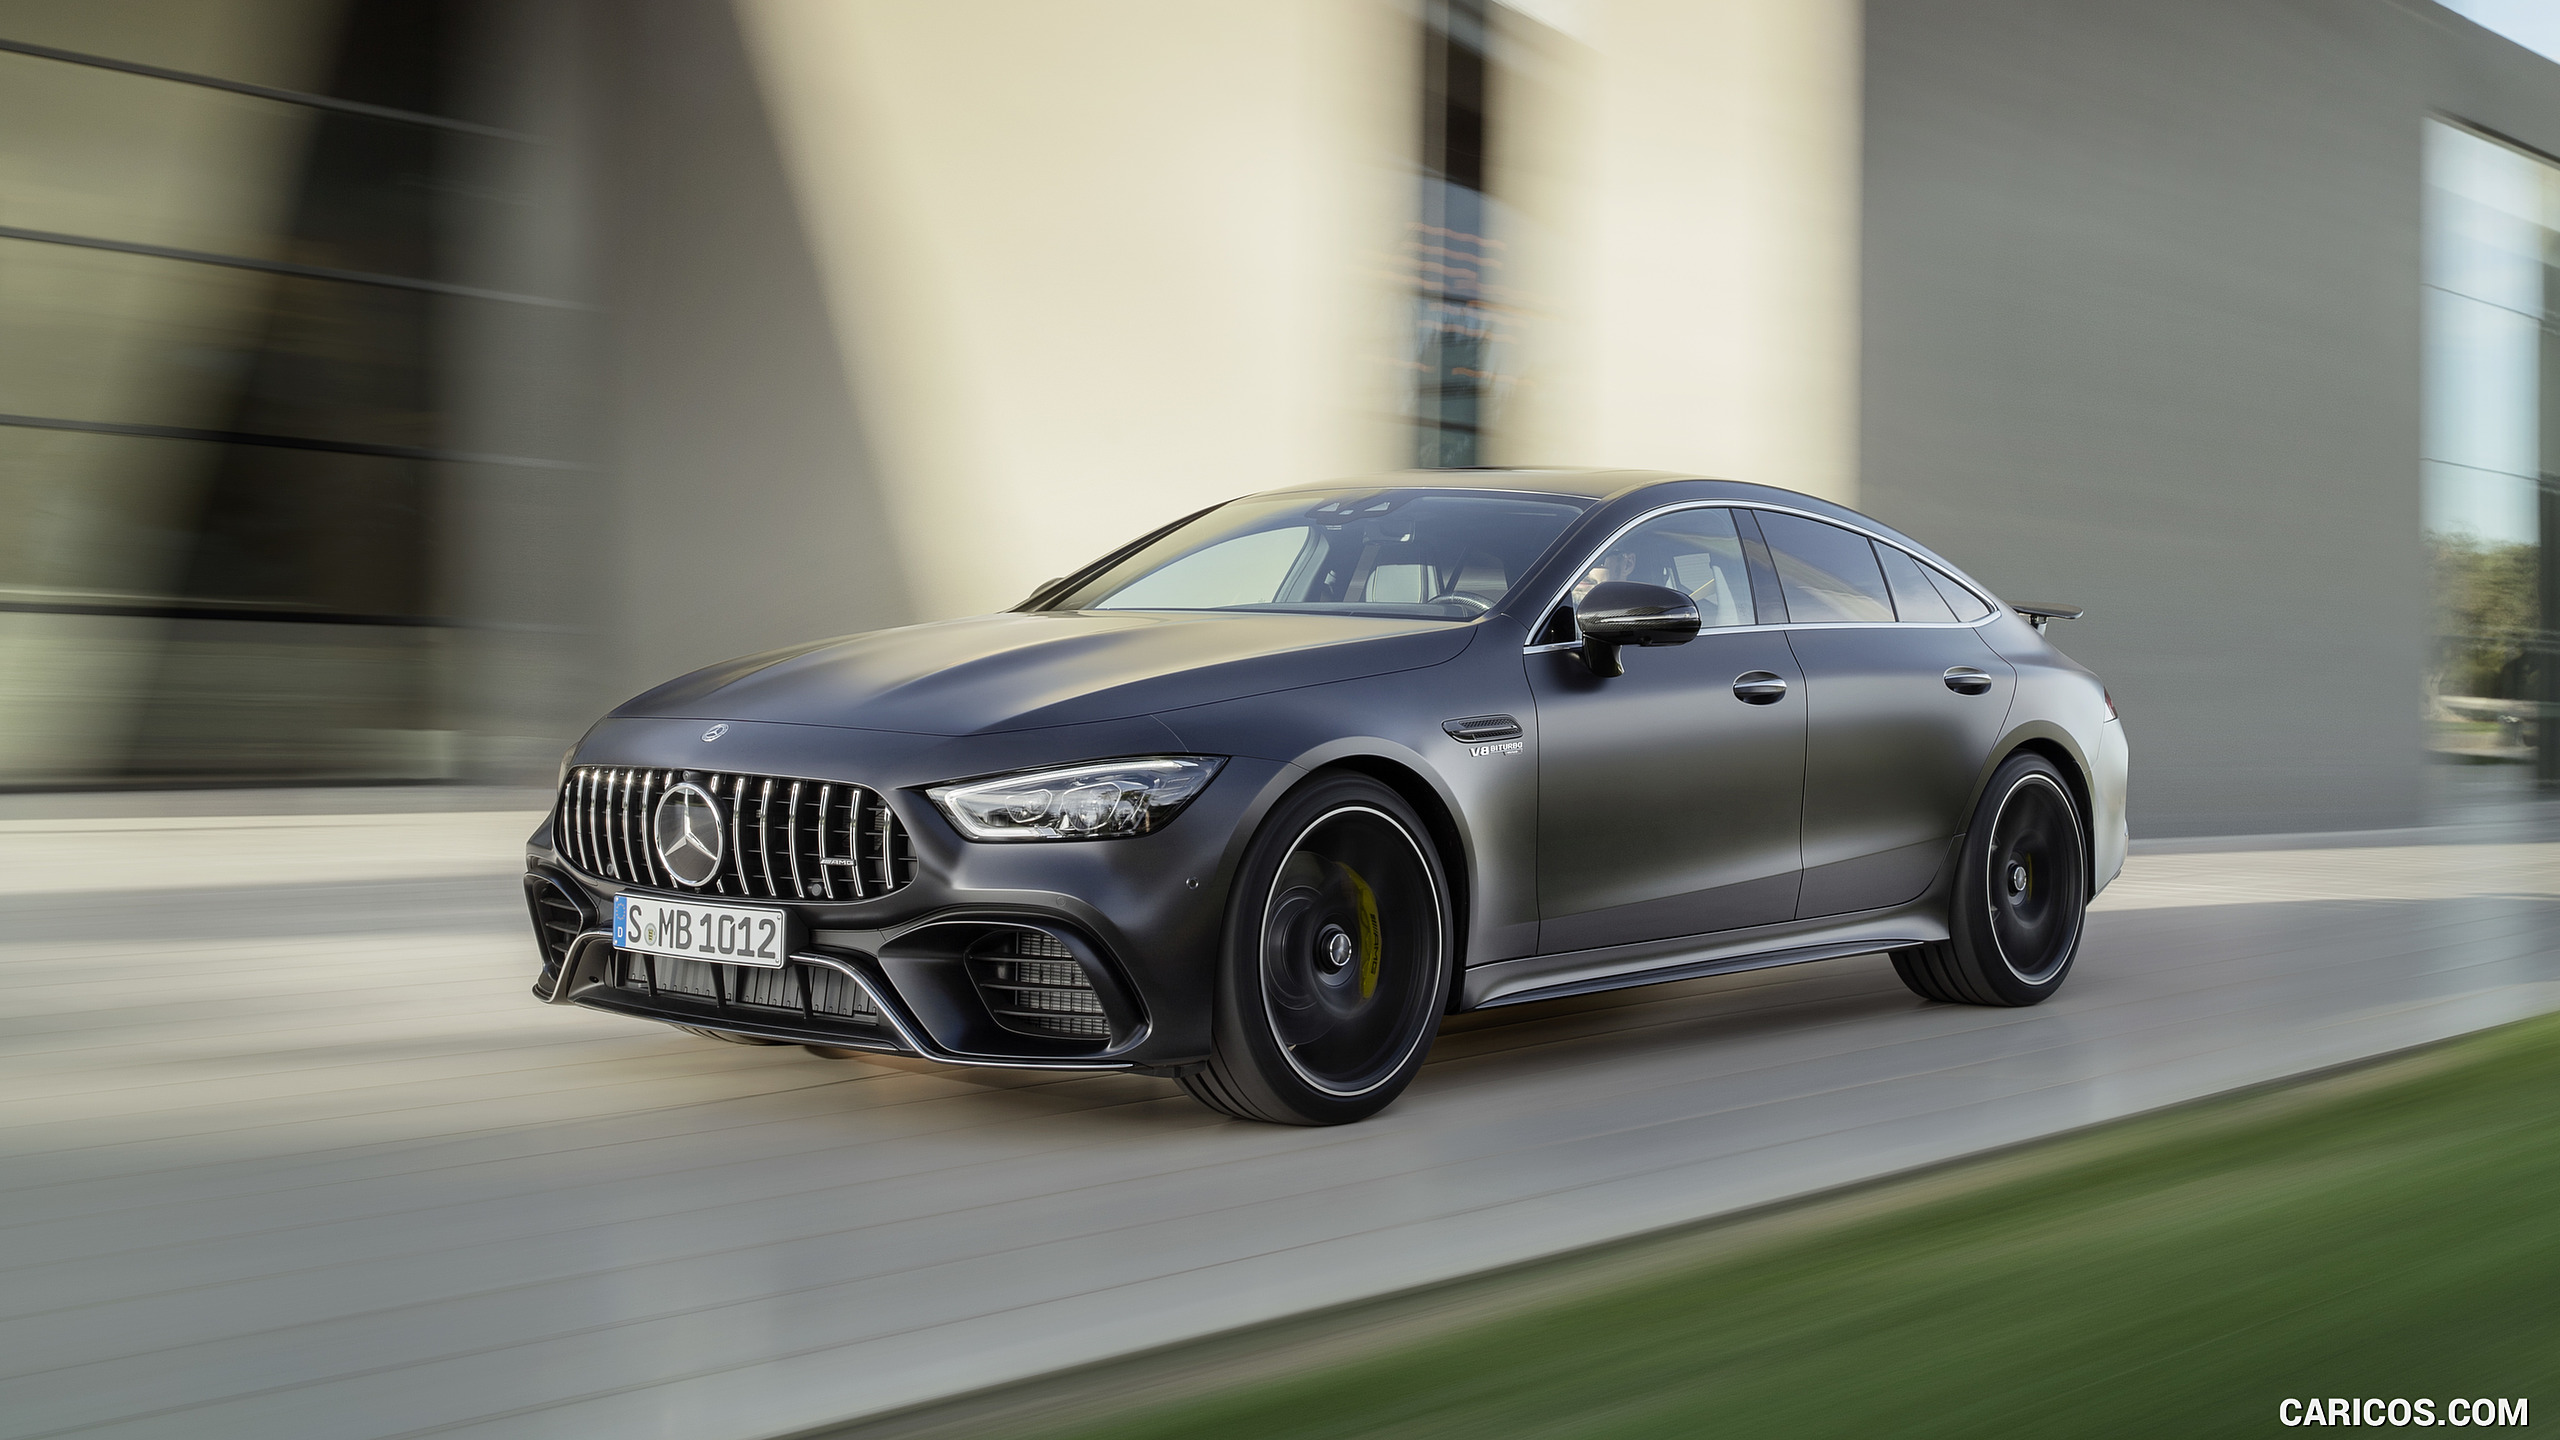 19 Mercedes Amg Gt 63 S 4matic 4 Door Coupe Color Graphite Grey Magno Front Three Quarter Caricos